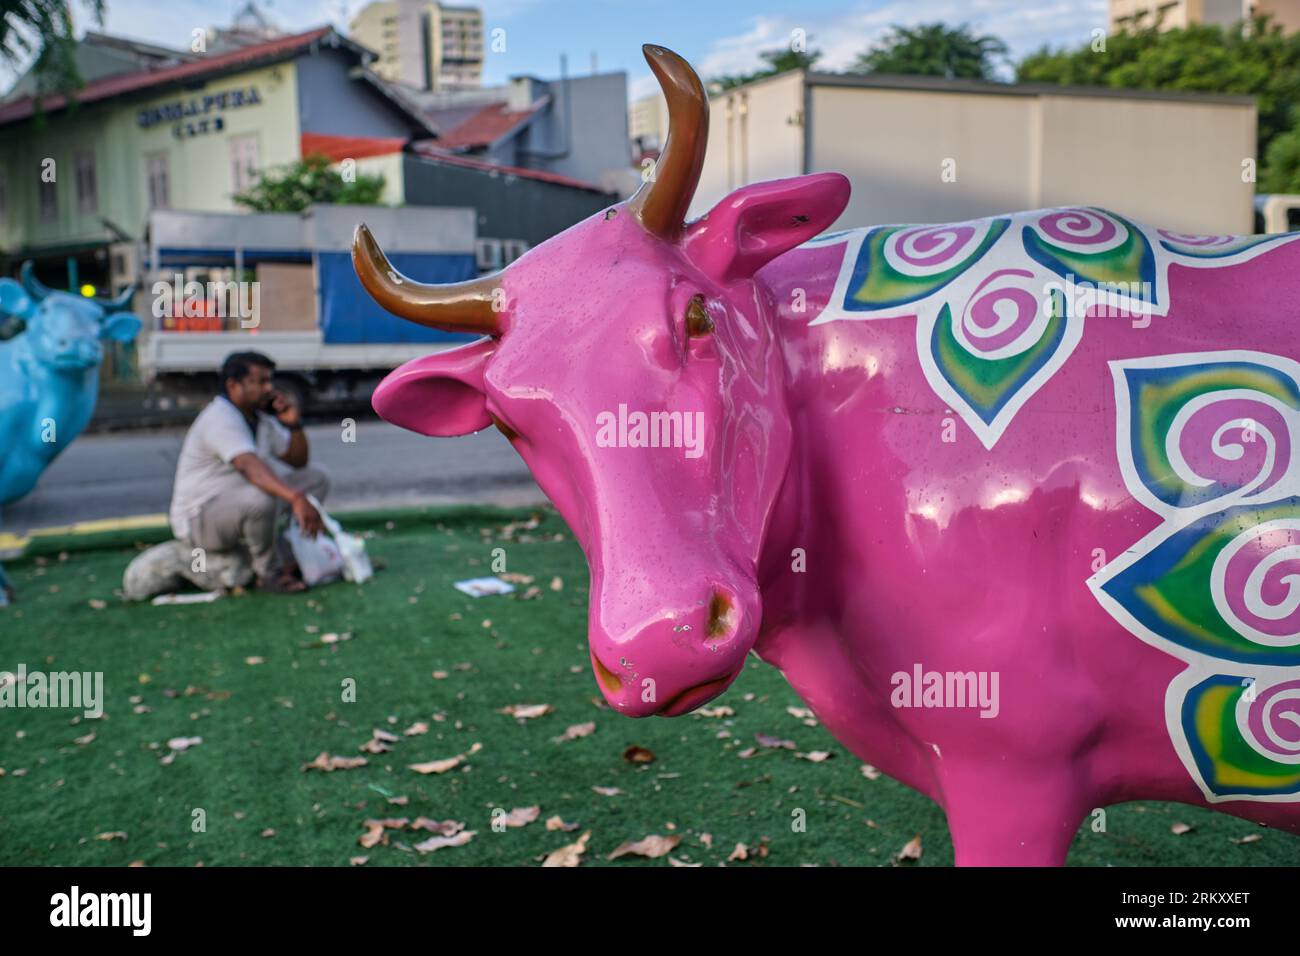 A worker from India sits near a colorful cow statue in a small park. in Little India area, Singapore, the 'grass' actually being artificial turf Stock Photo